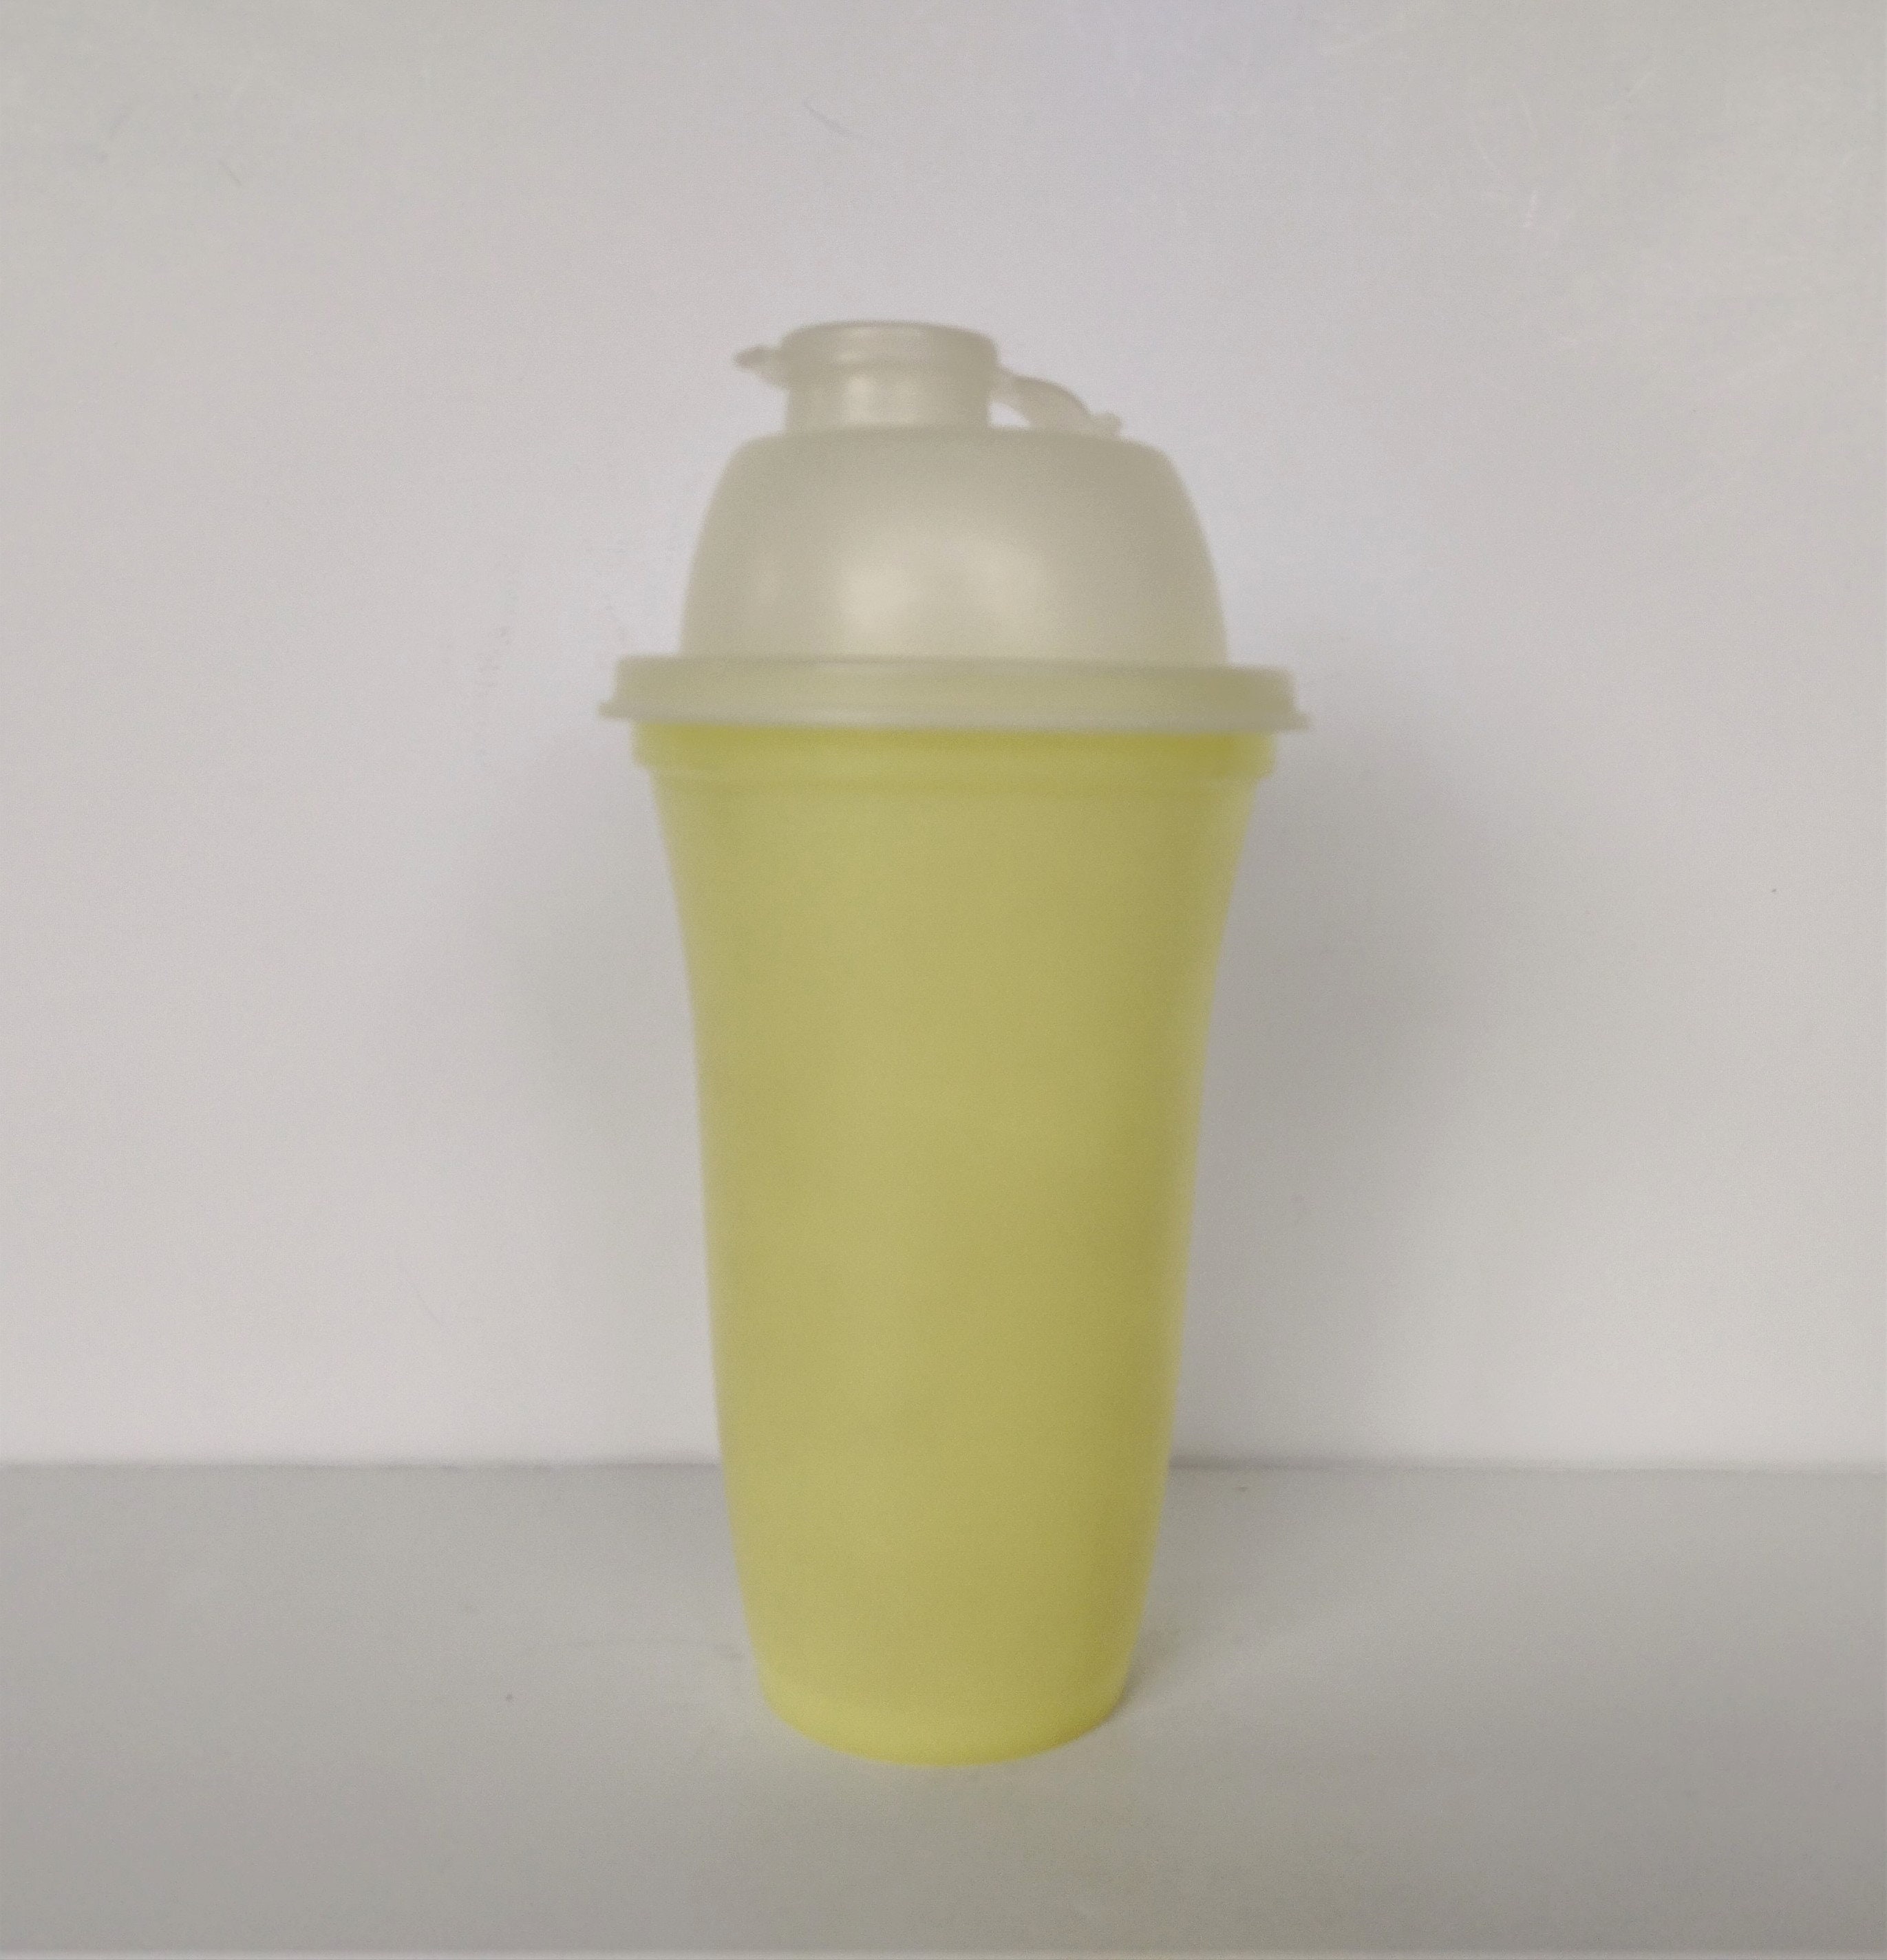 Find more Free! Vintage Tupperware Gravy Shaker Includes All